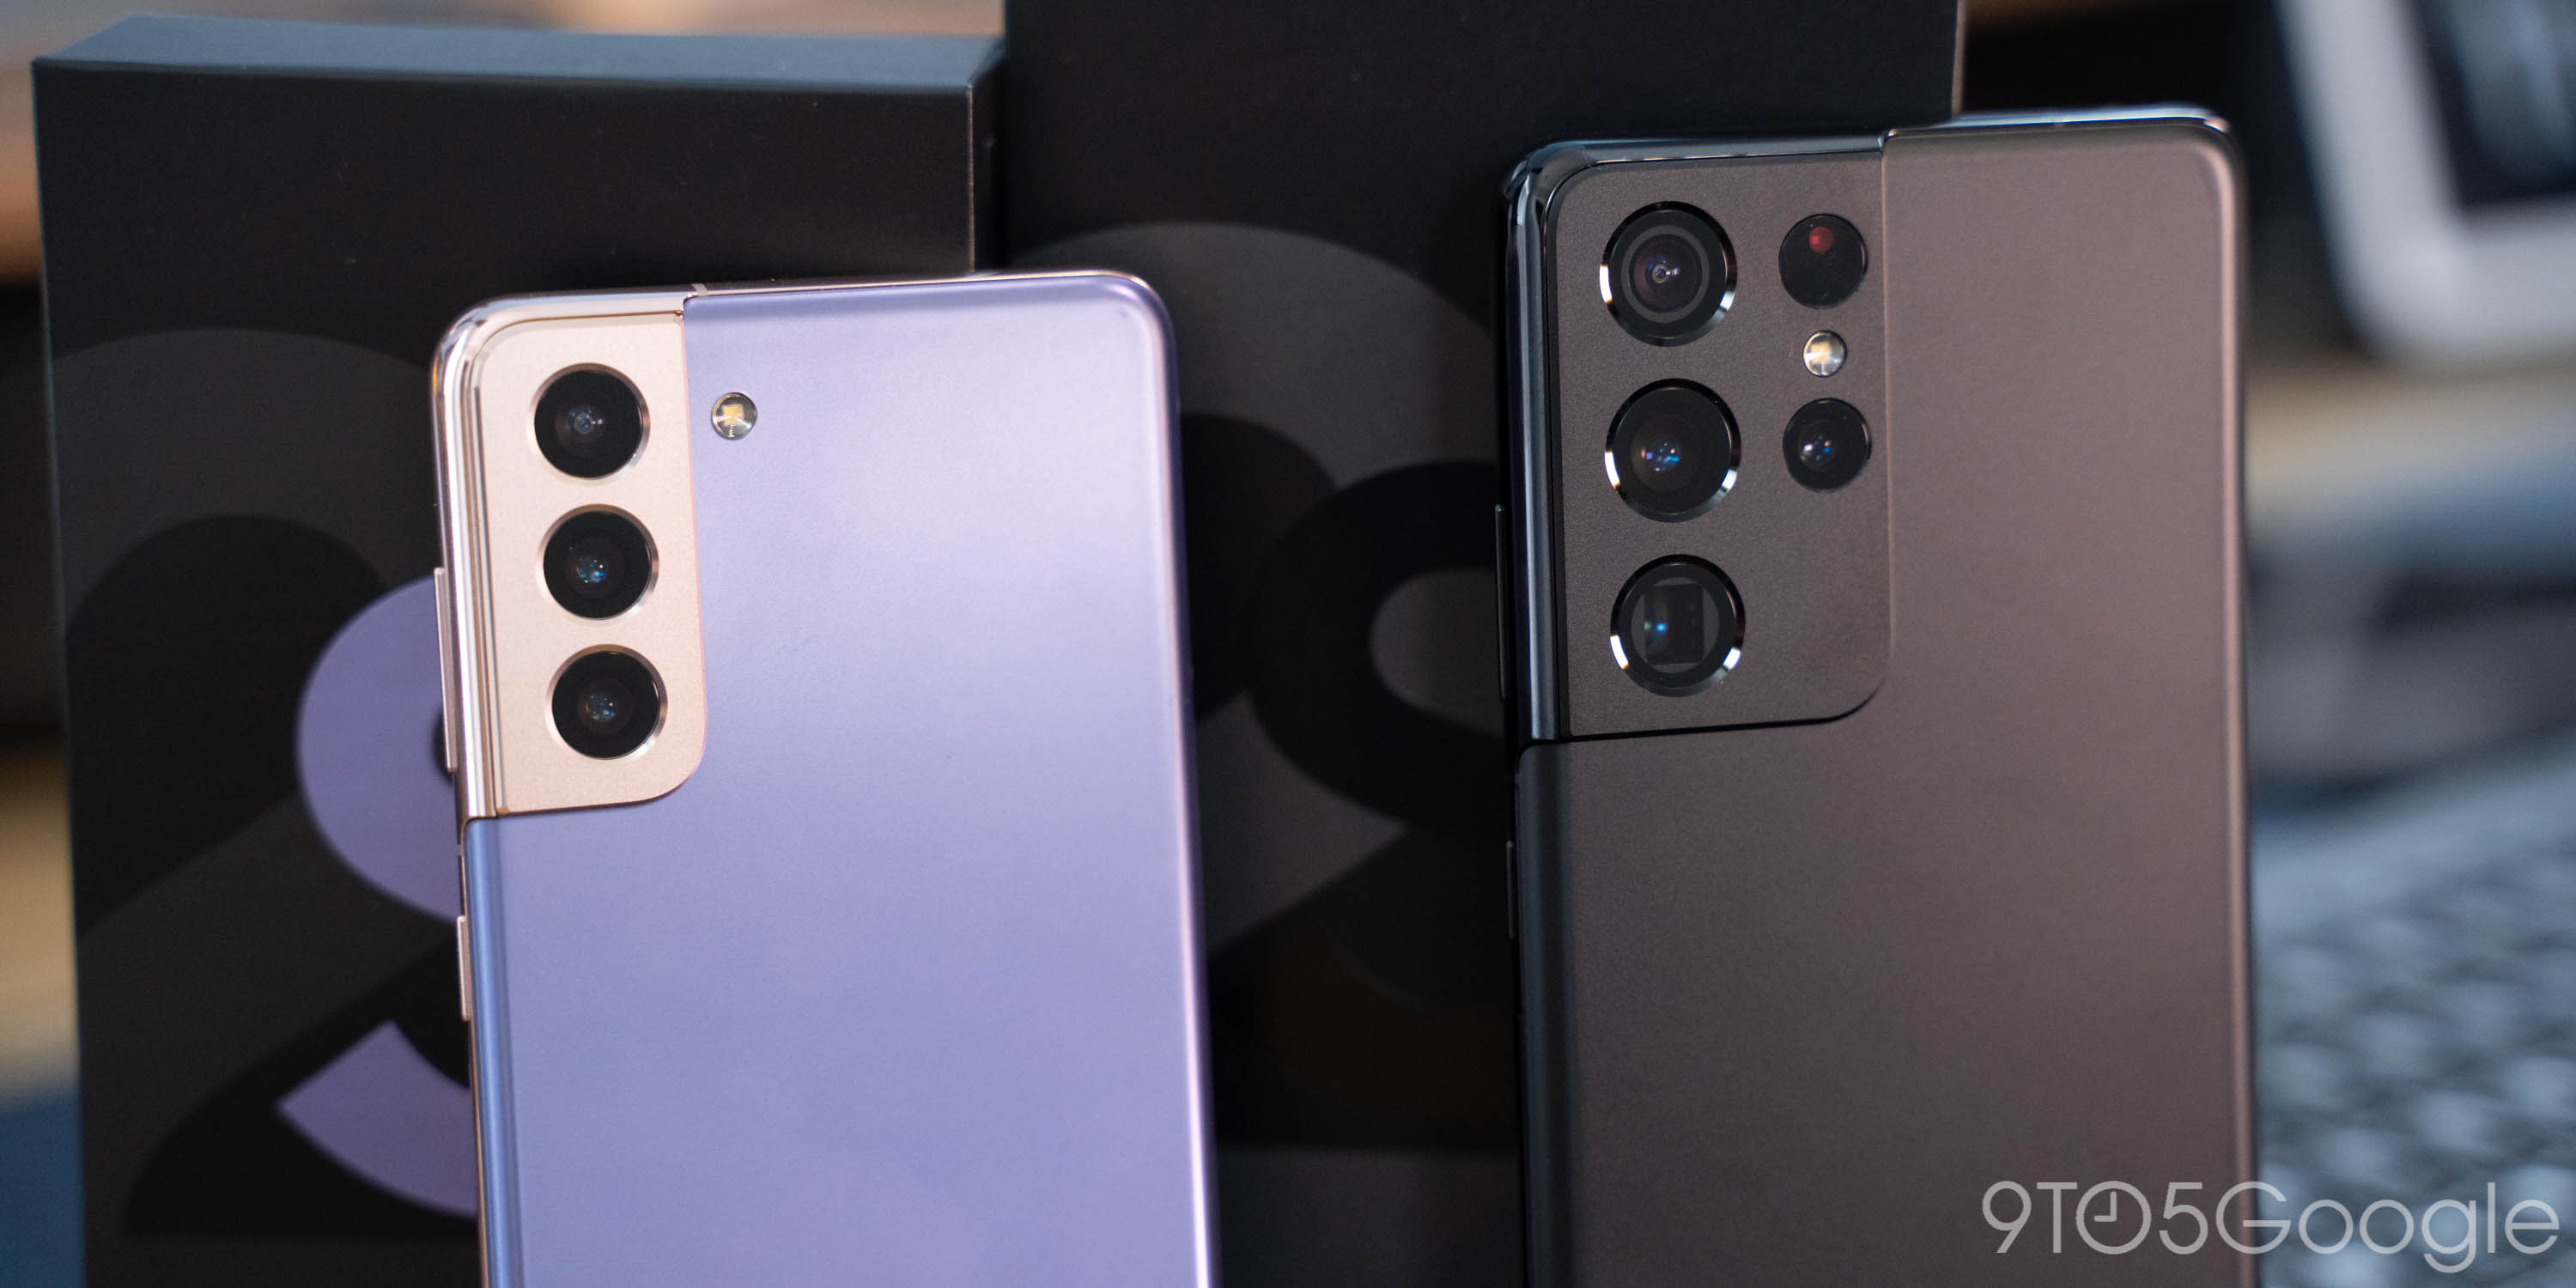 How to Block Pop-Ups on Your Samsung Galaxy S10 in 3 Ways